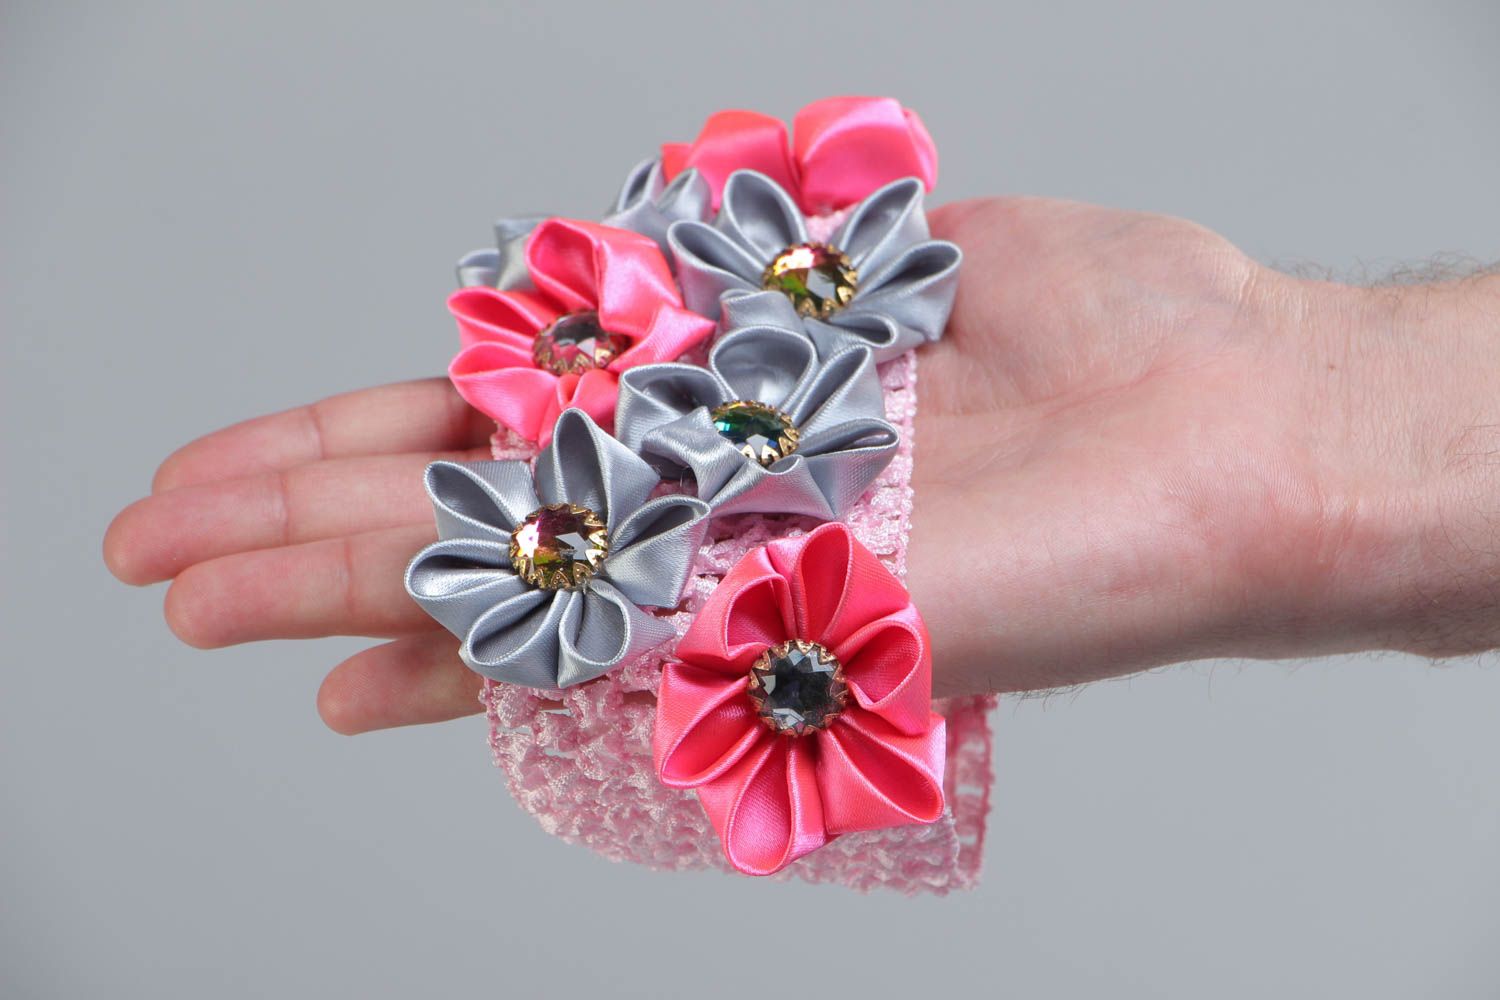 Handmade stretch headband with kanzashi satin flowers of pink and gray colors photo 5